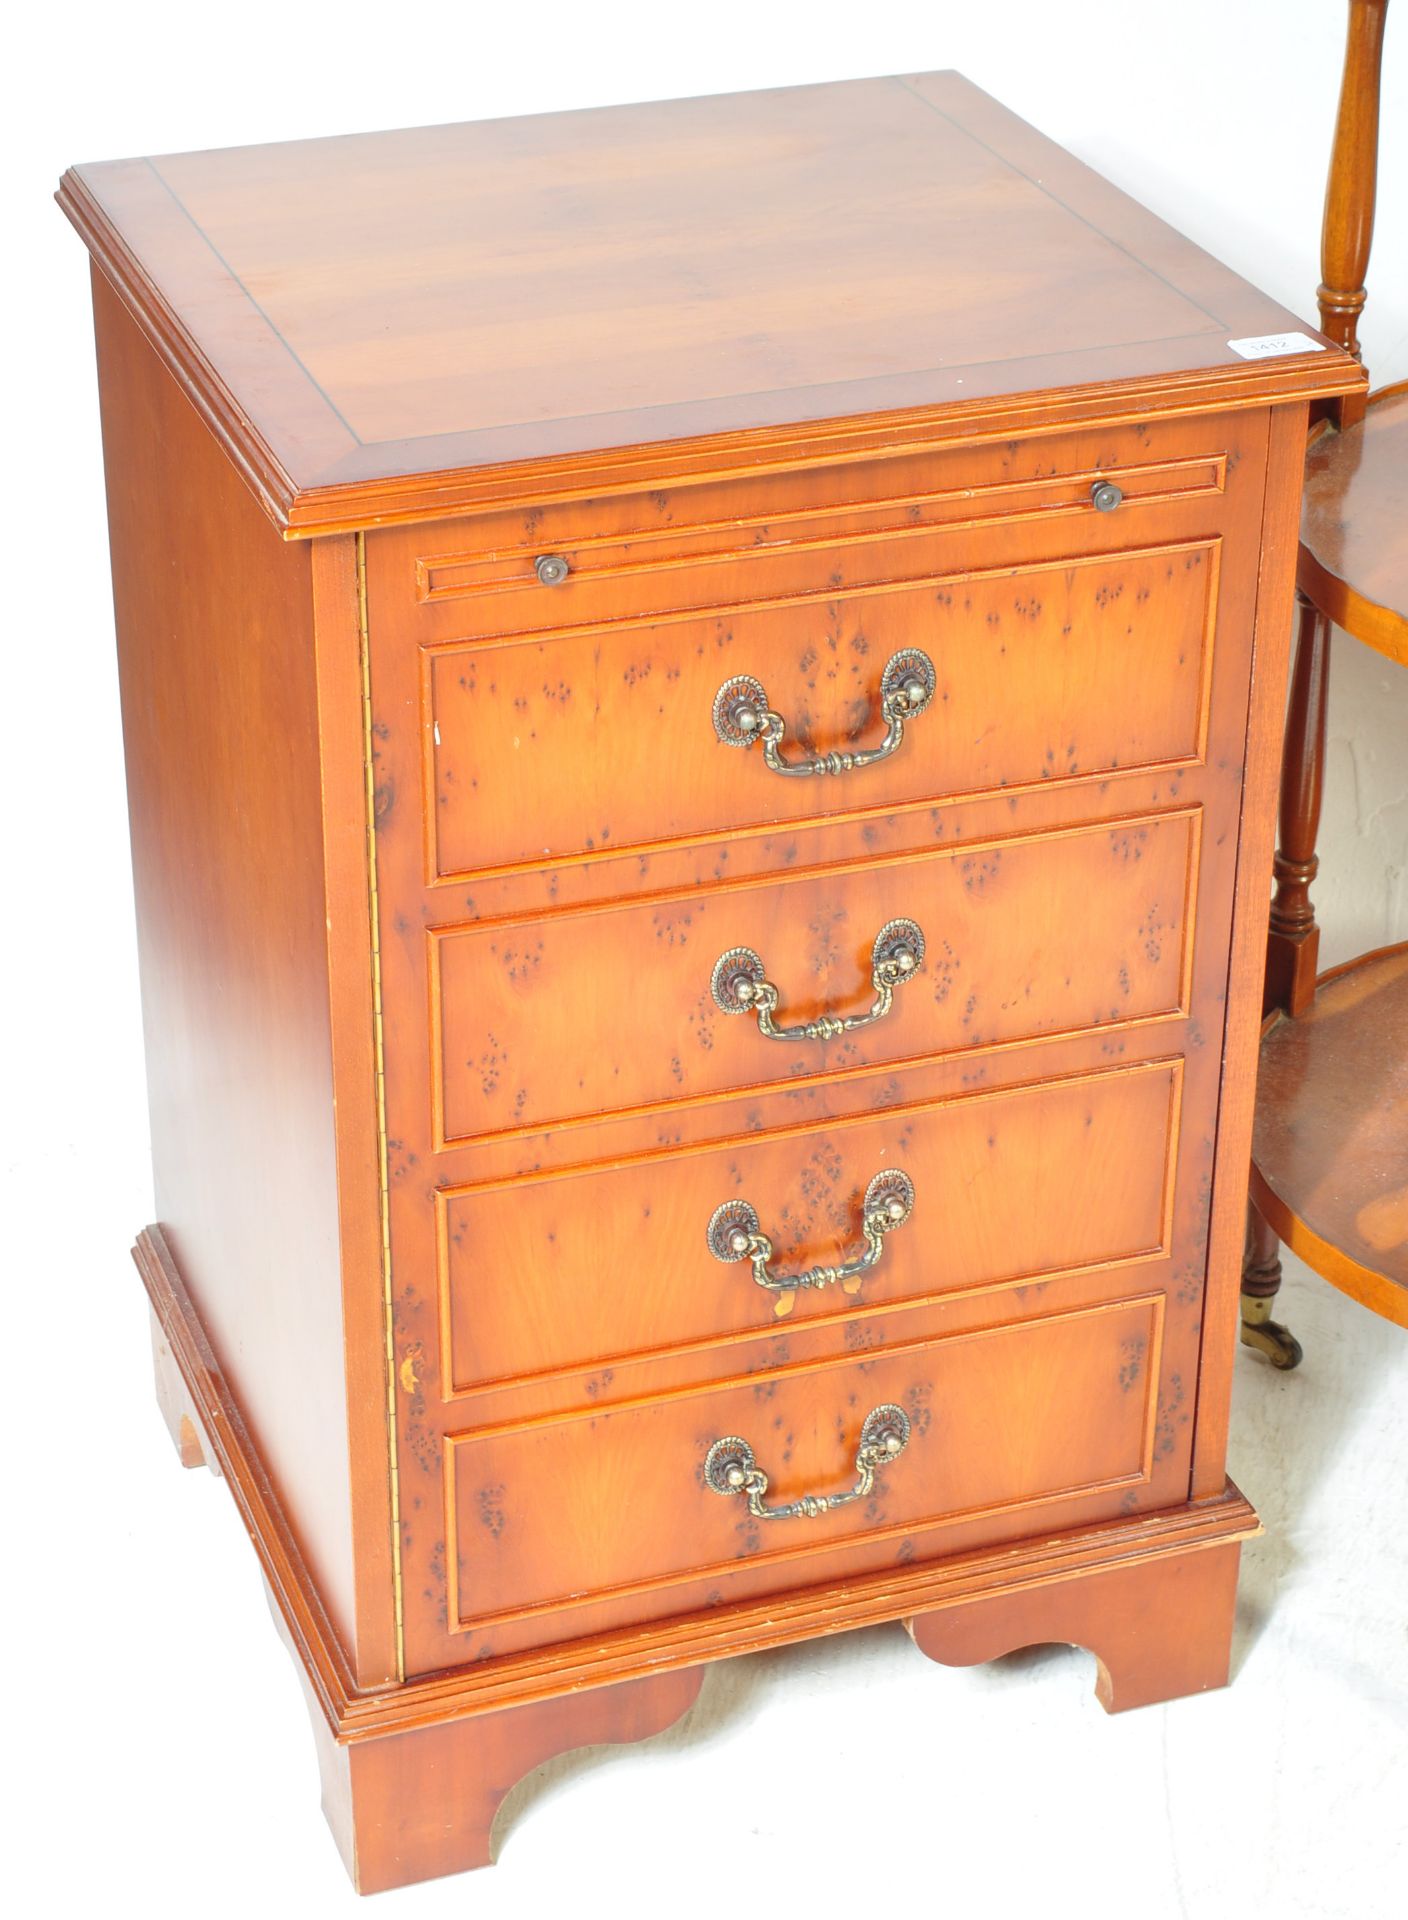 COLLECTION OF YEW WOOD REGENCY FURNITURE - Image 2 of 7